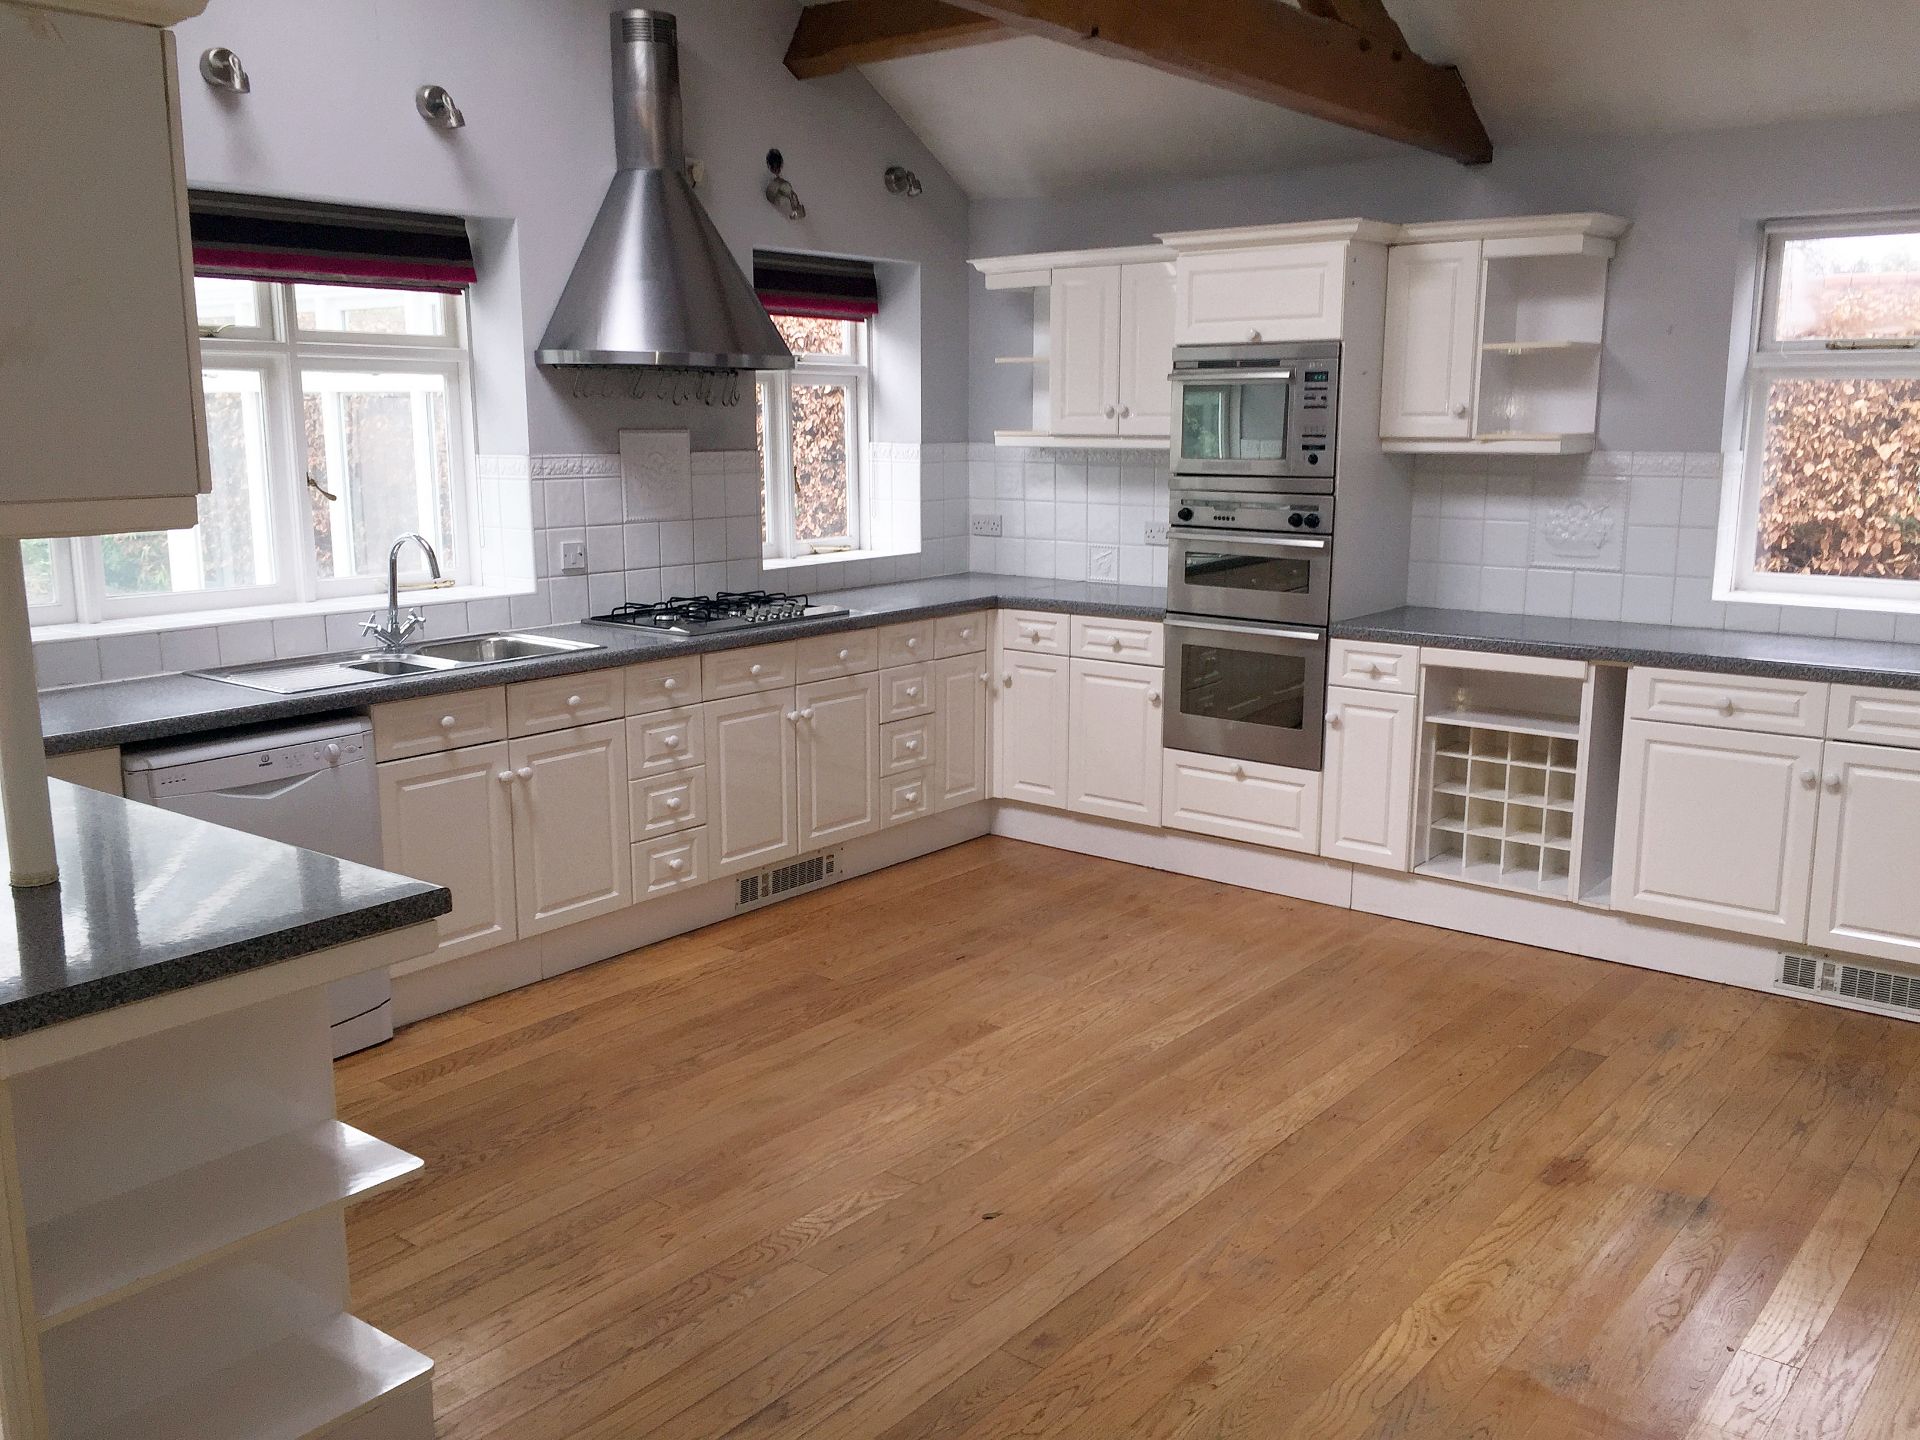 **JUST ADDED** 1 x Spacious Bespoke Fitted Kitchen In Cream With Neff And Whirlpool Appliances - - Image 2 of 37